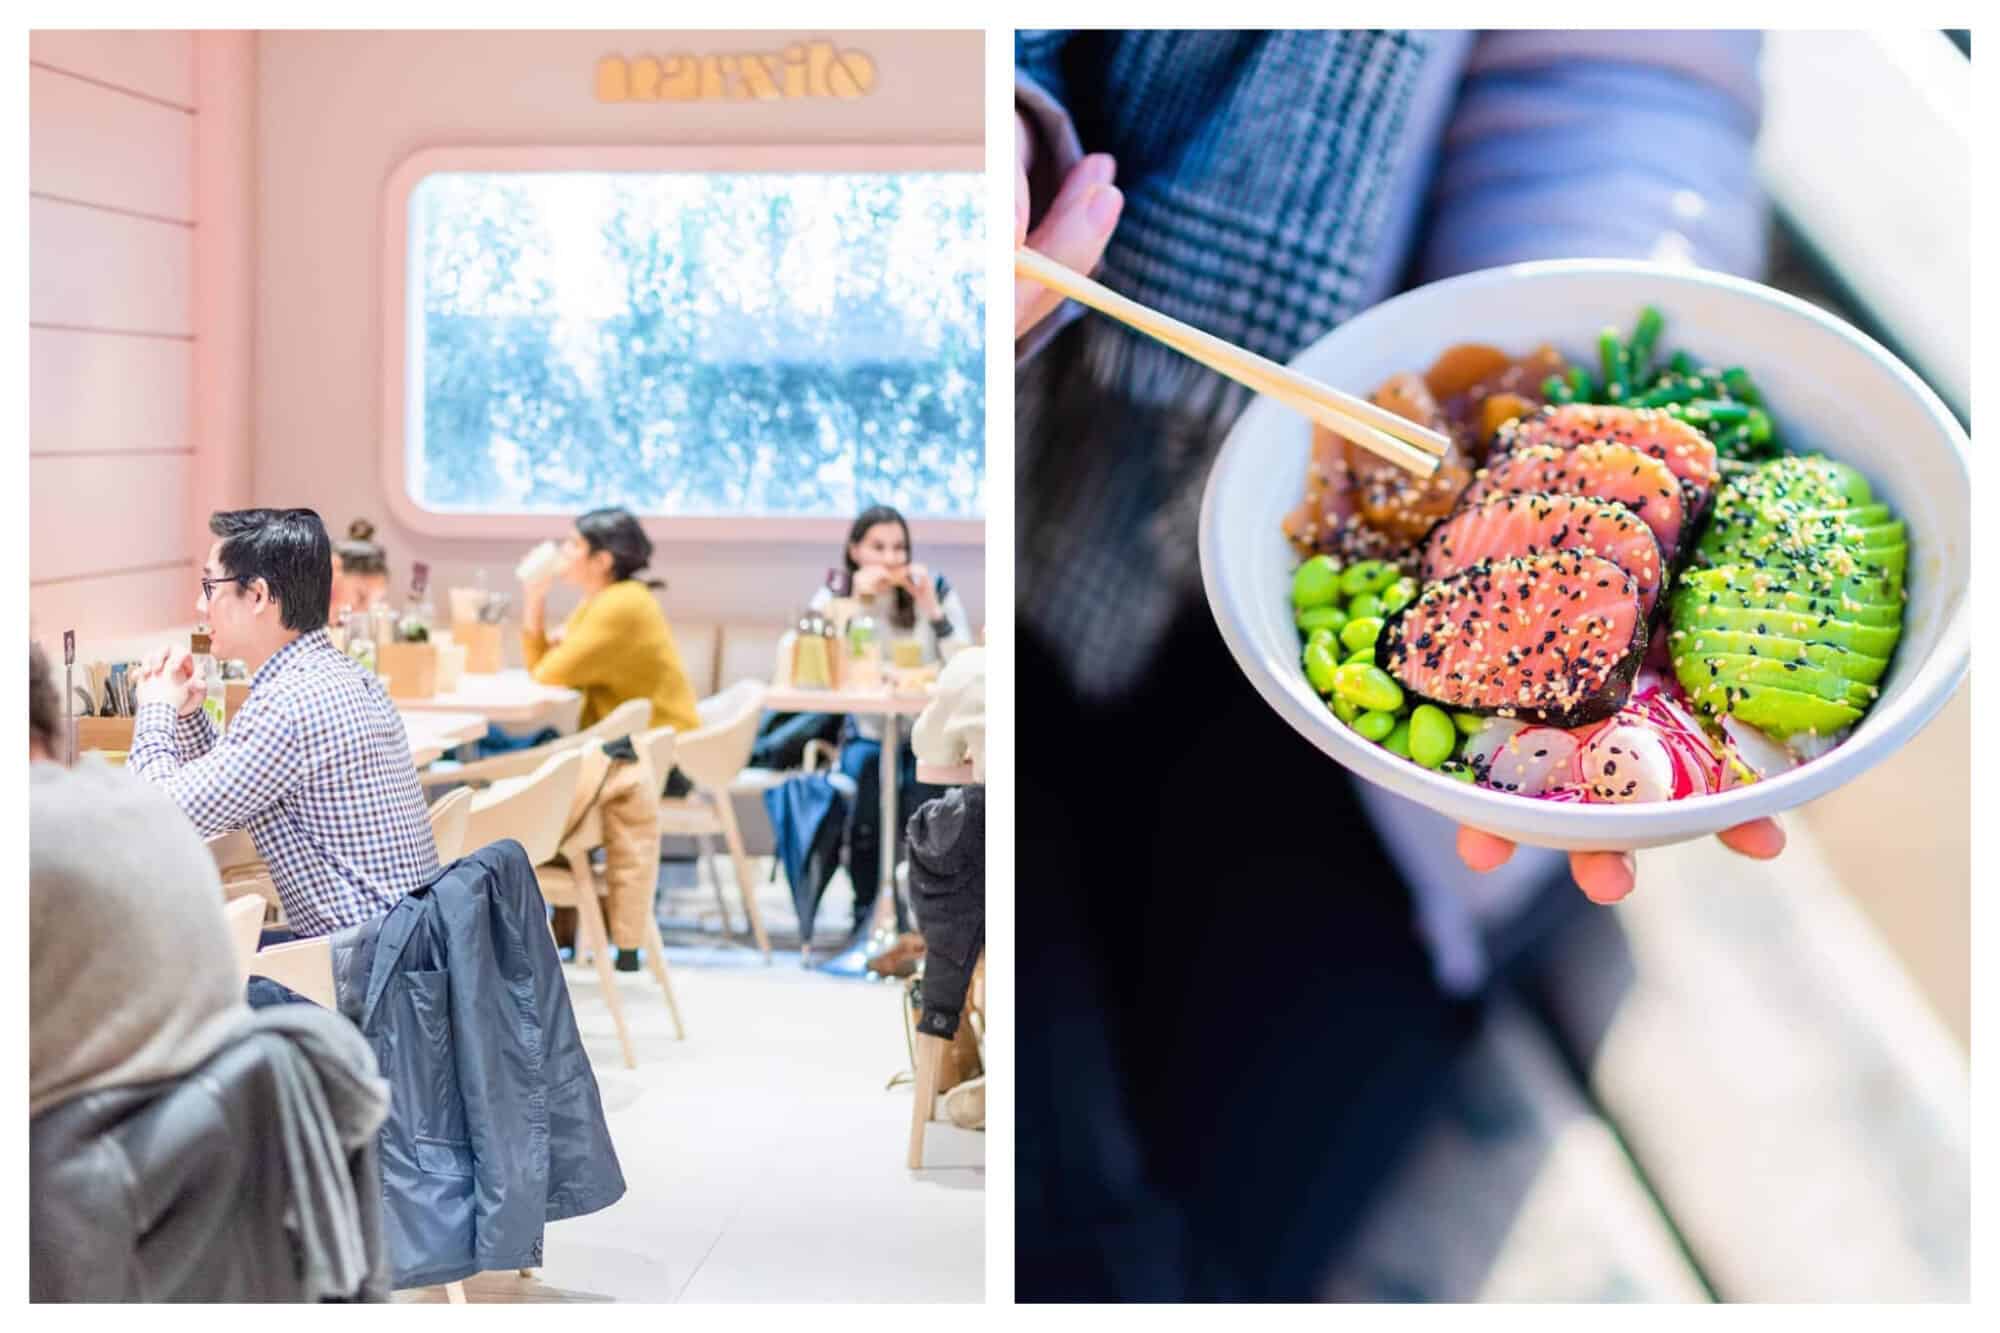 Left: The inside of Marxito restaurant near the Champs Elysées in Paris. The walls are a light baby pink, and people are seated for lunch at tables in the restaurant, Right: A poké bowl at Marxito, which includes salmon, avocado, edamame, radish, and various other produce items.